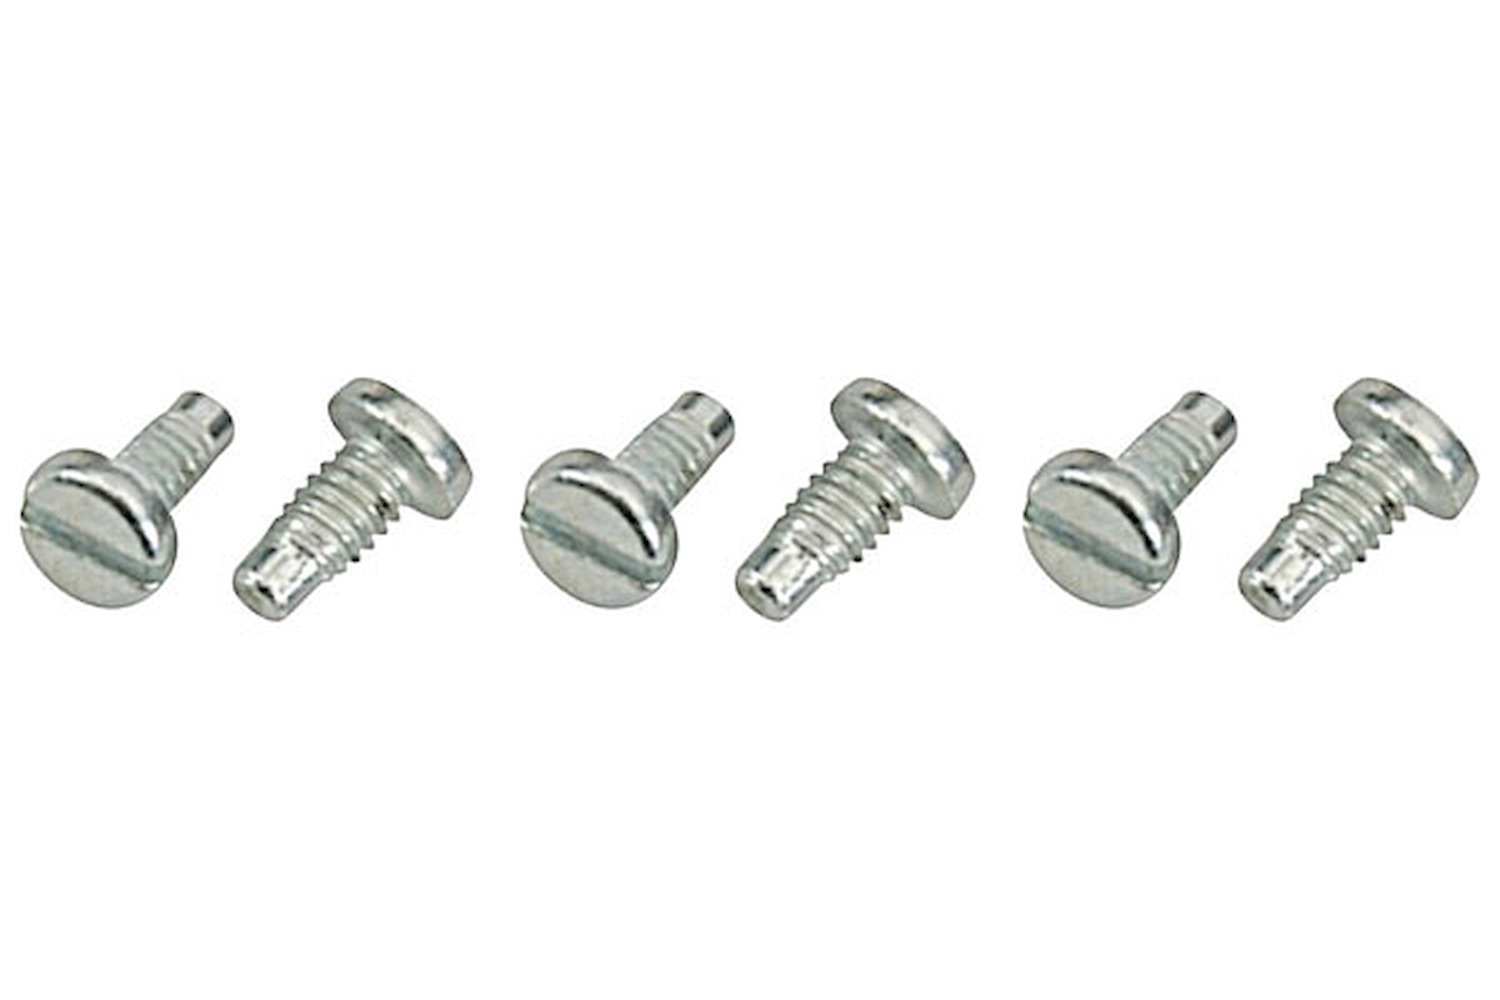 CH31855 Headlight Retaining Ring Screws for Select 1946-1976 GM Vehicles